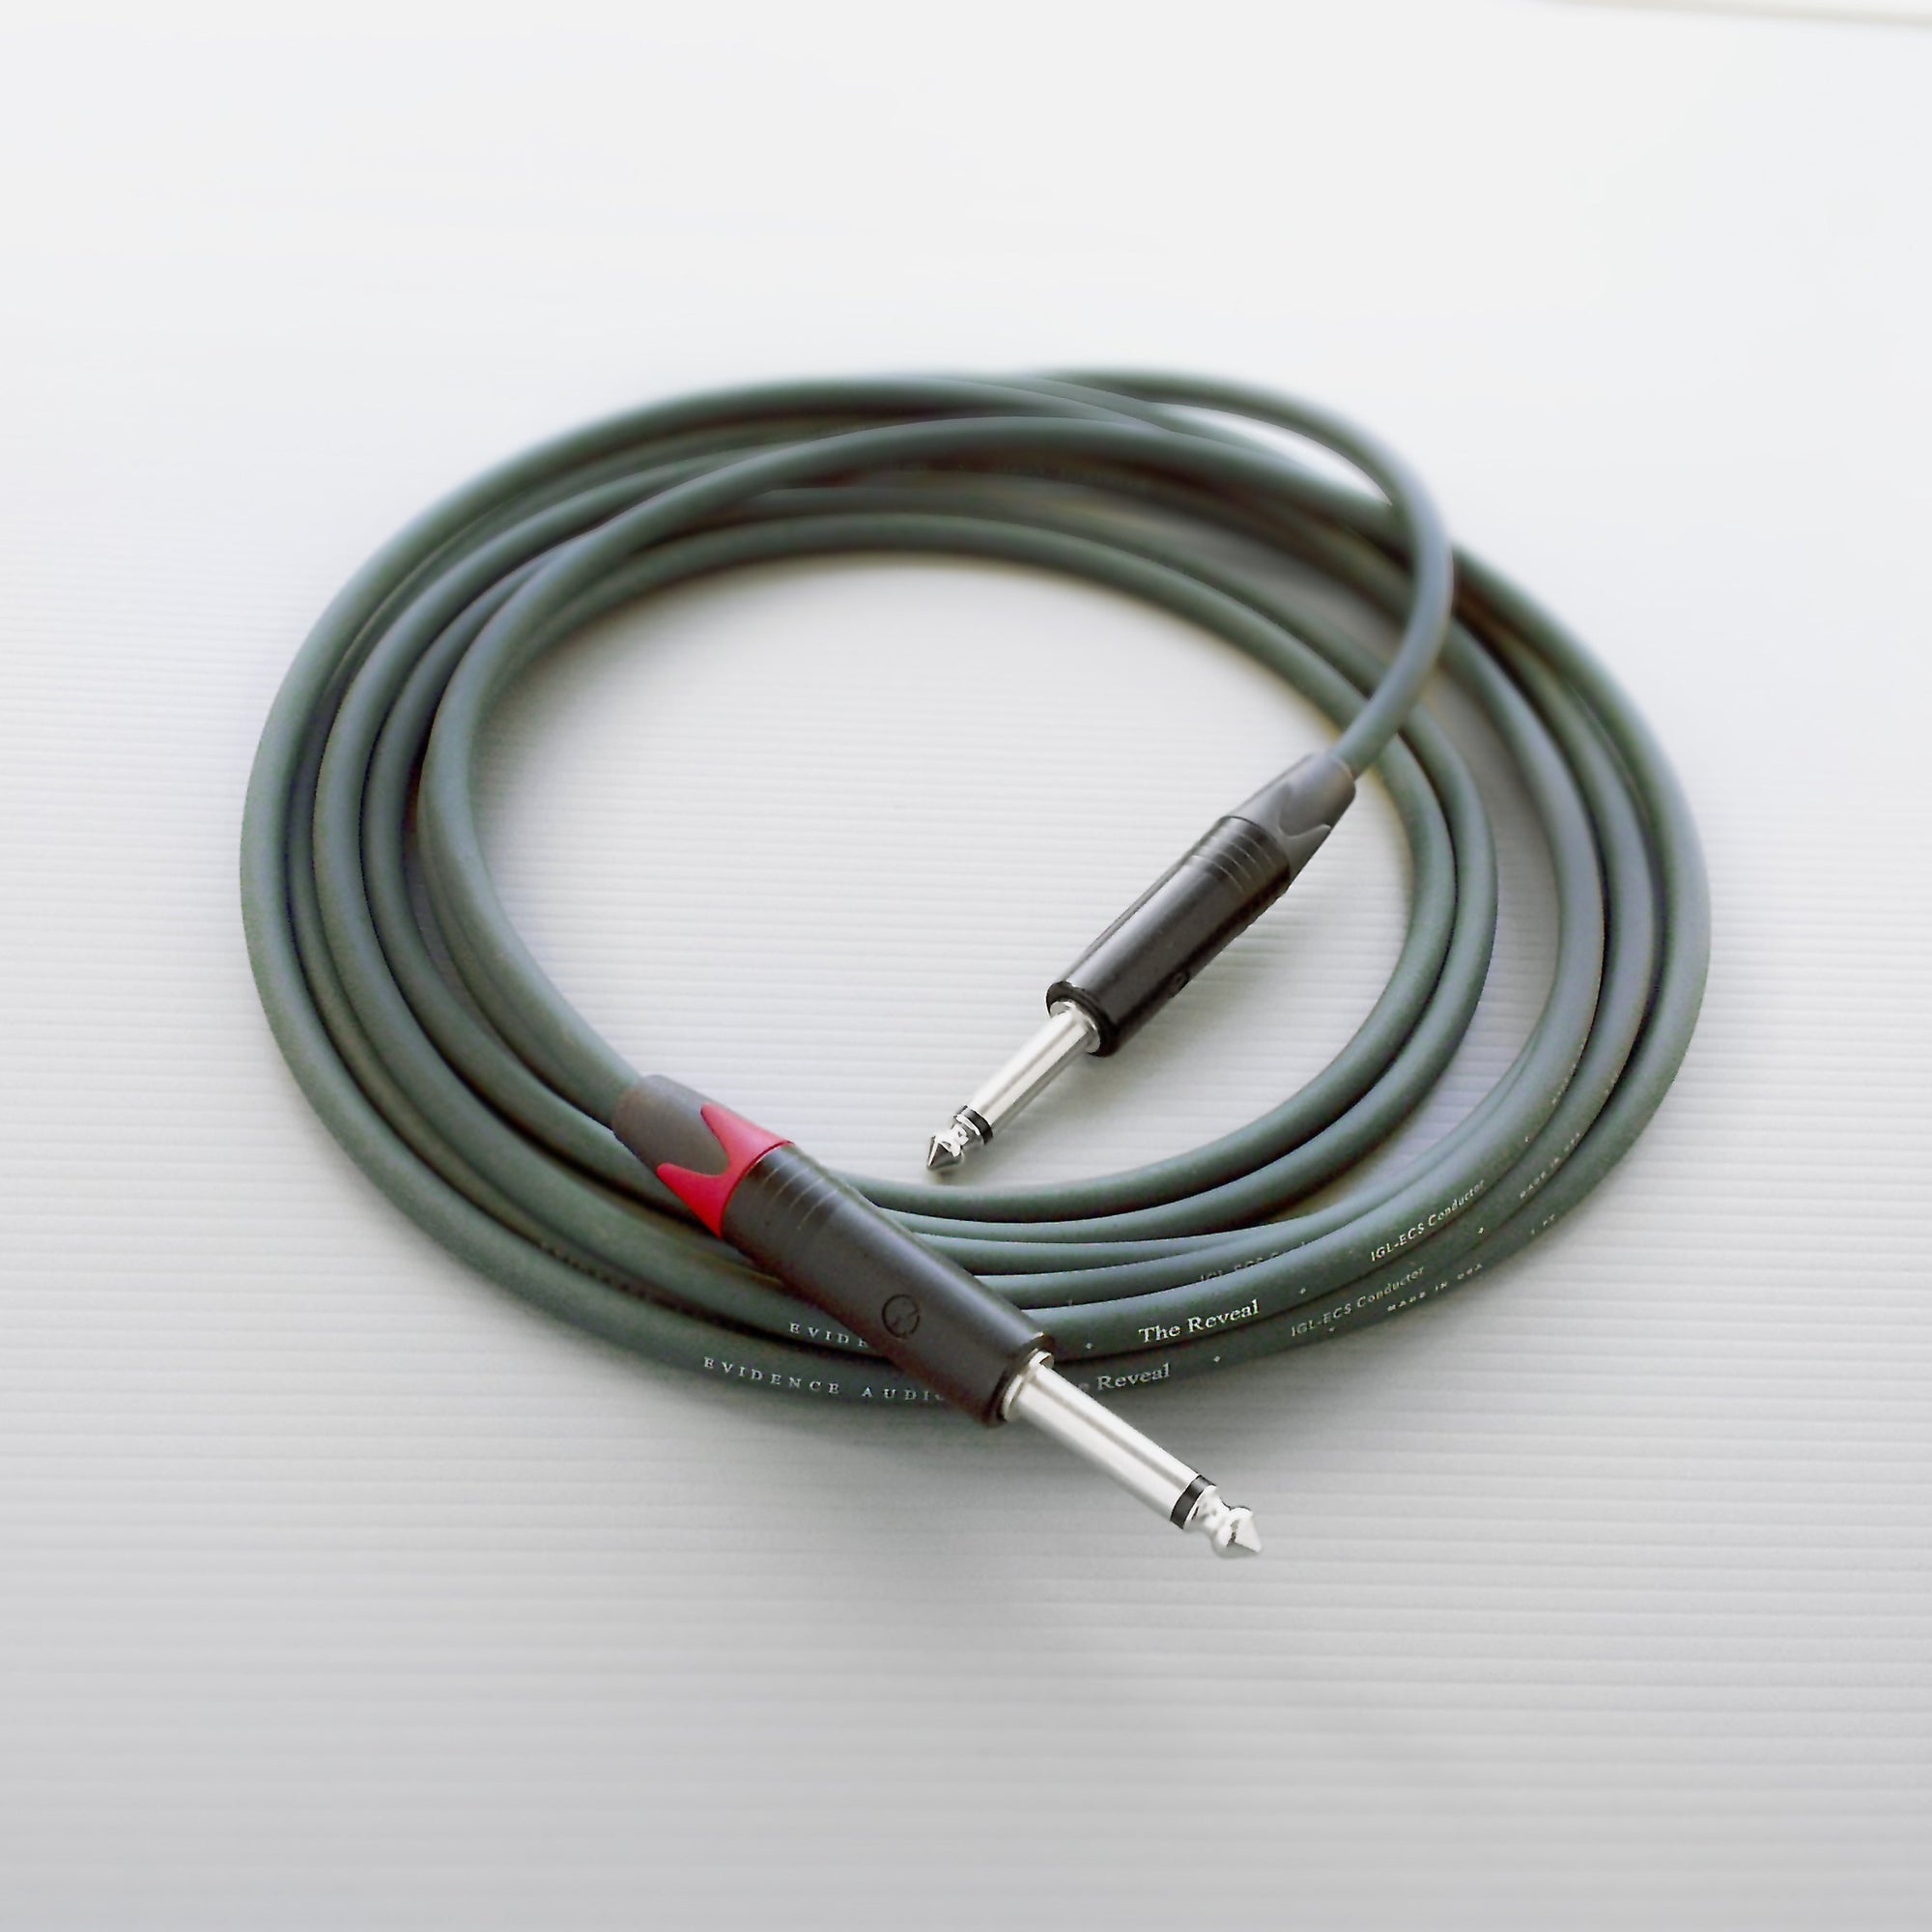 Evidence Audio Reveal Guitar Cable - 15ft: Straight to Straight